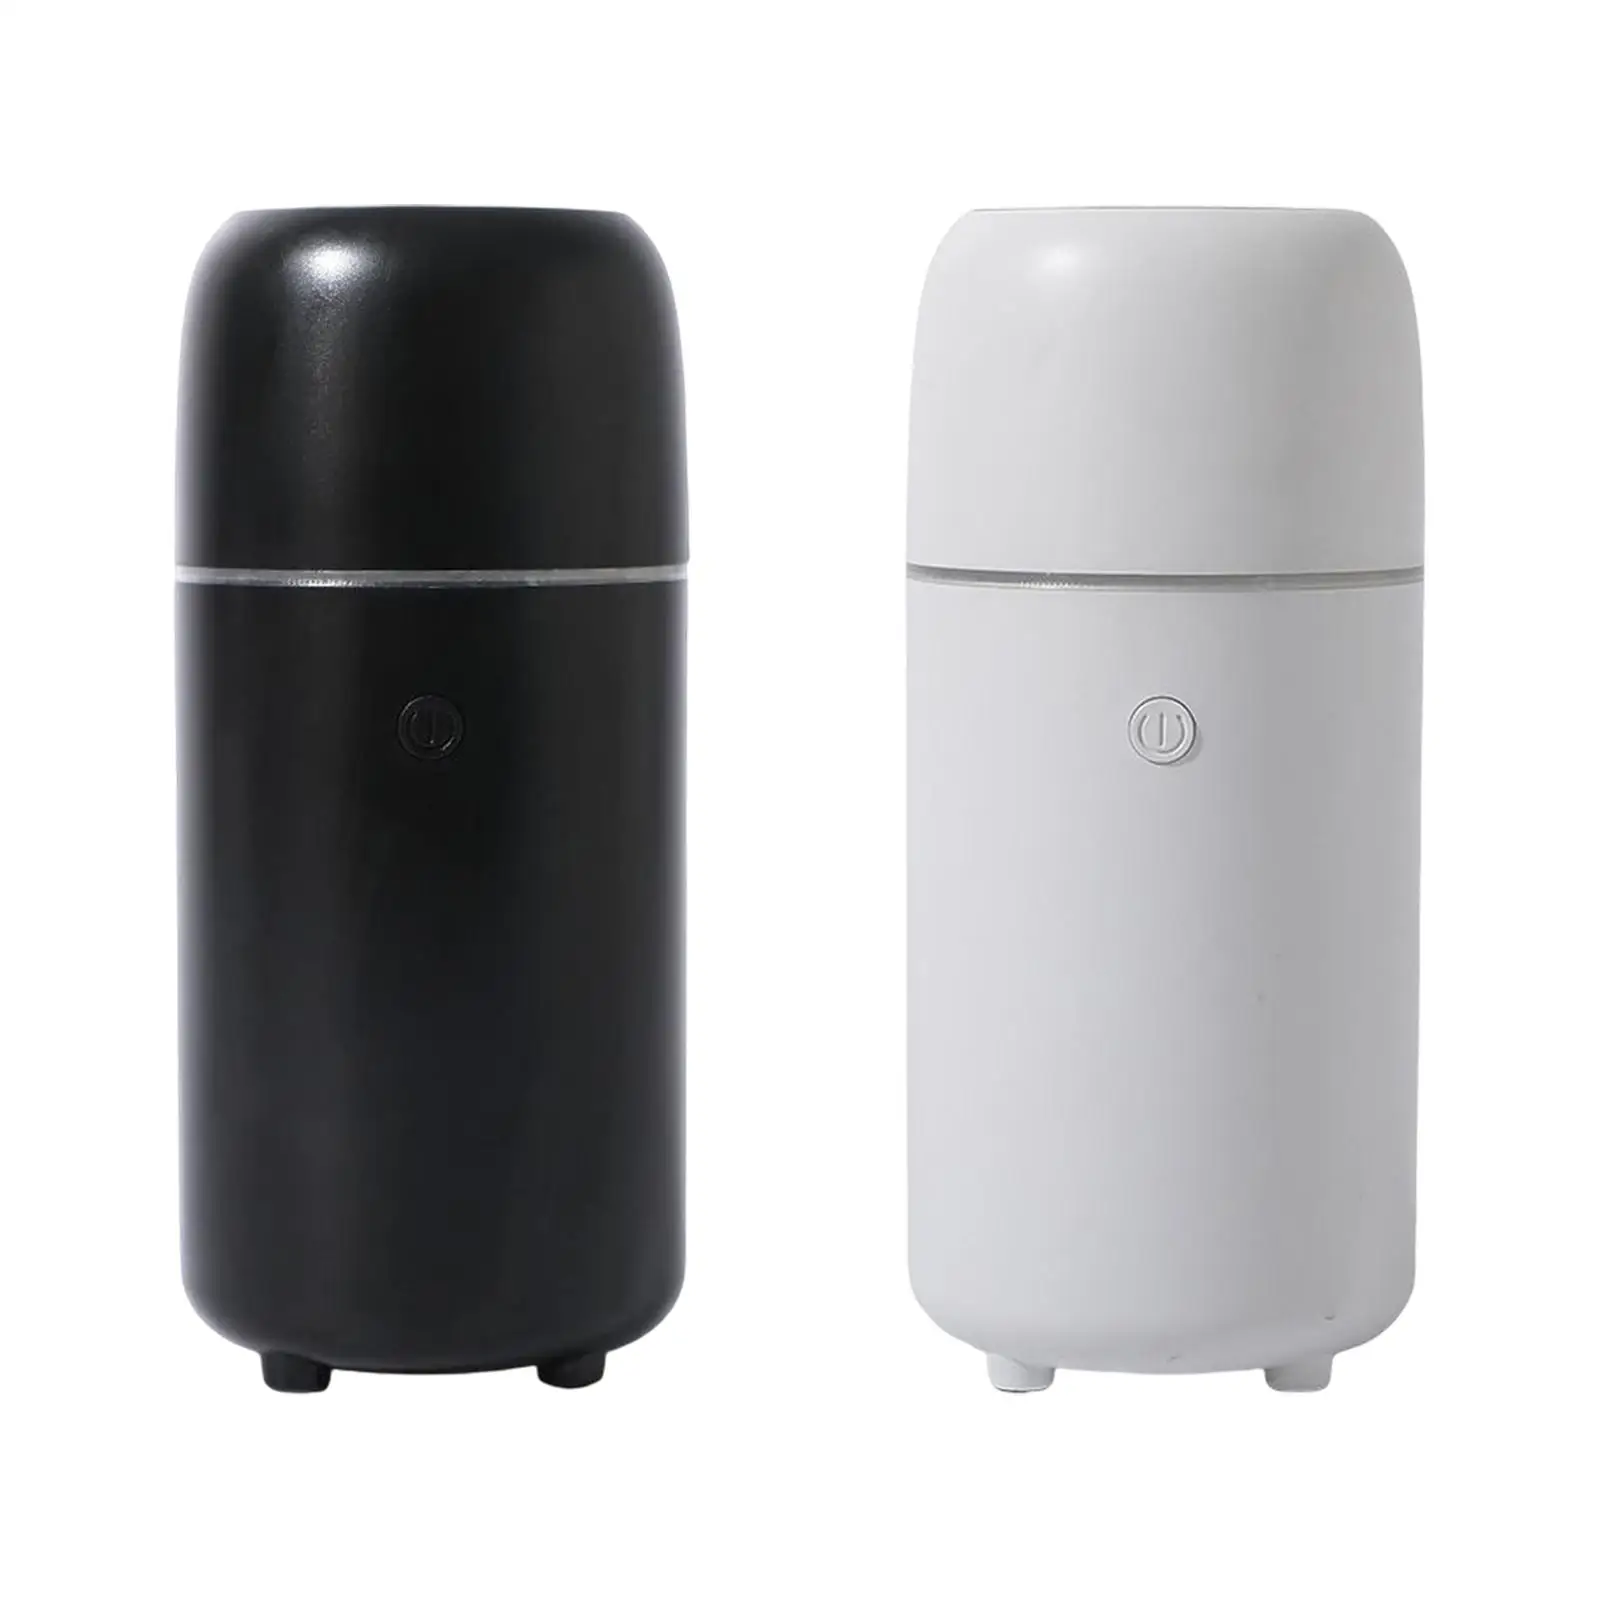 Personal Humidifier Portable Humidifiers for Car NightStand Office